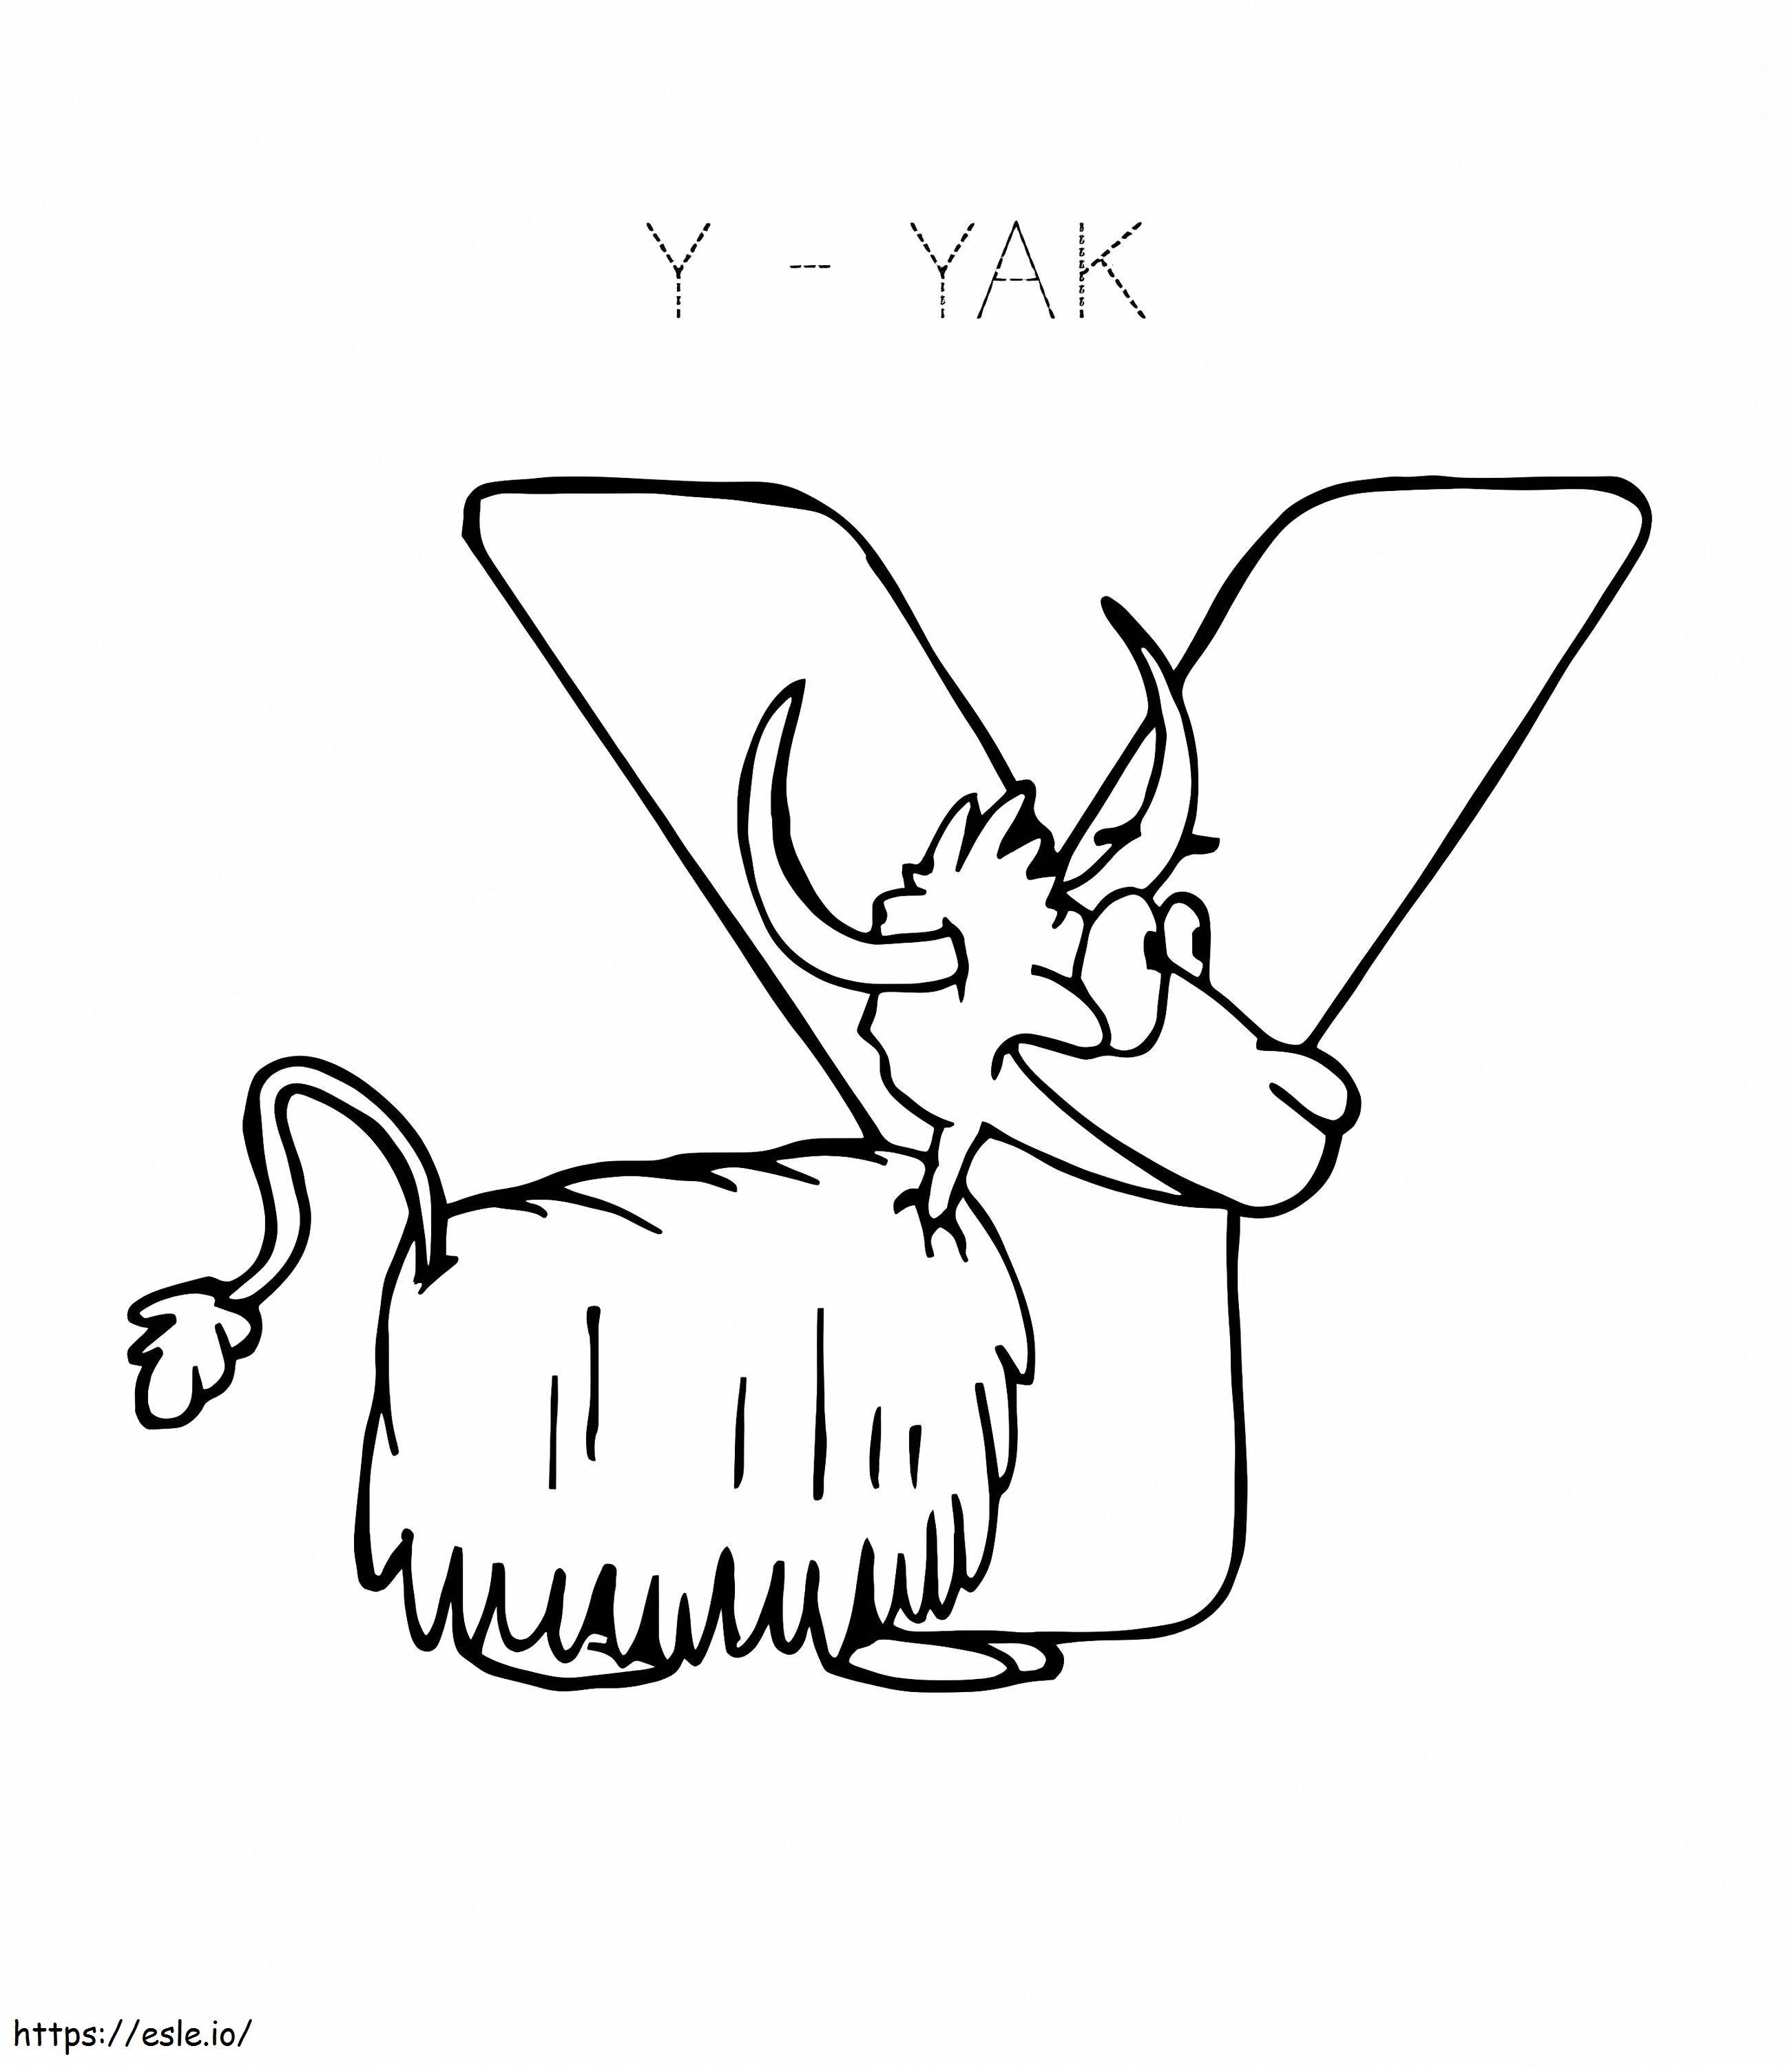 Yak Letter Y 2 coloring page